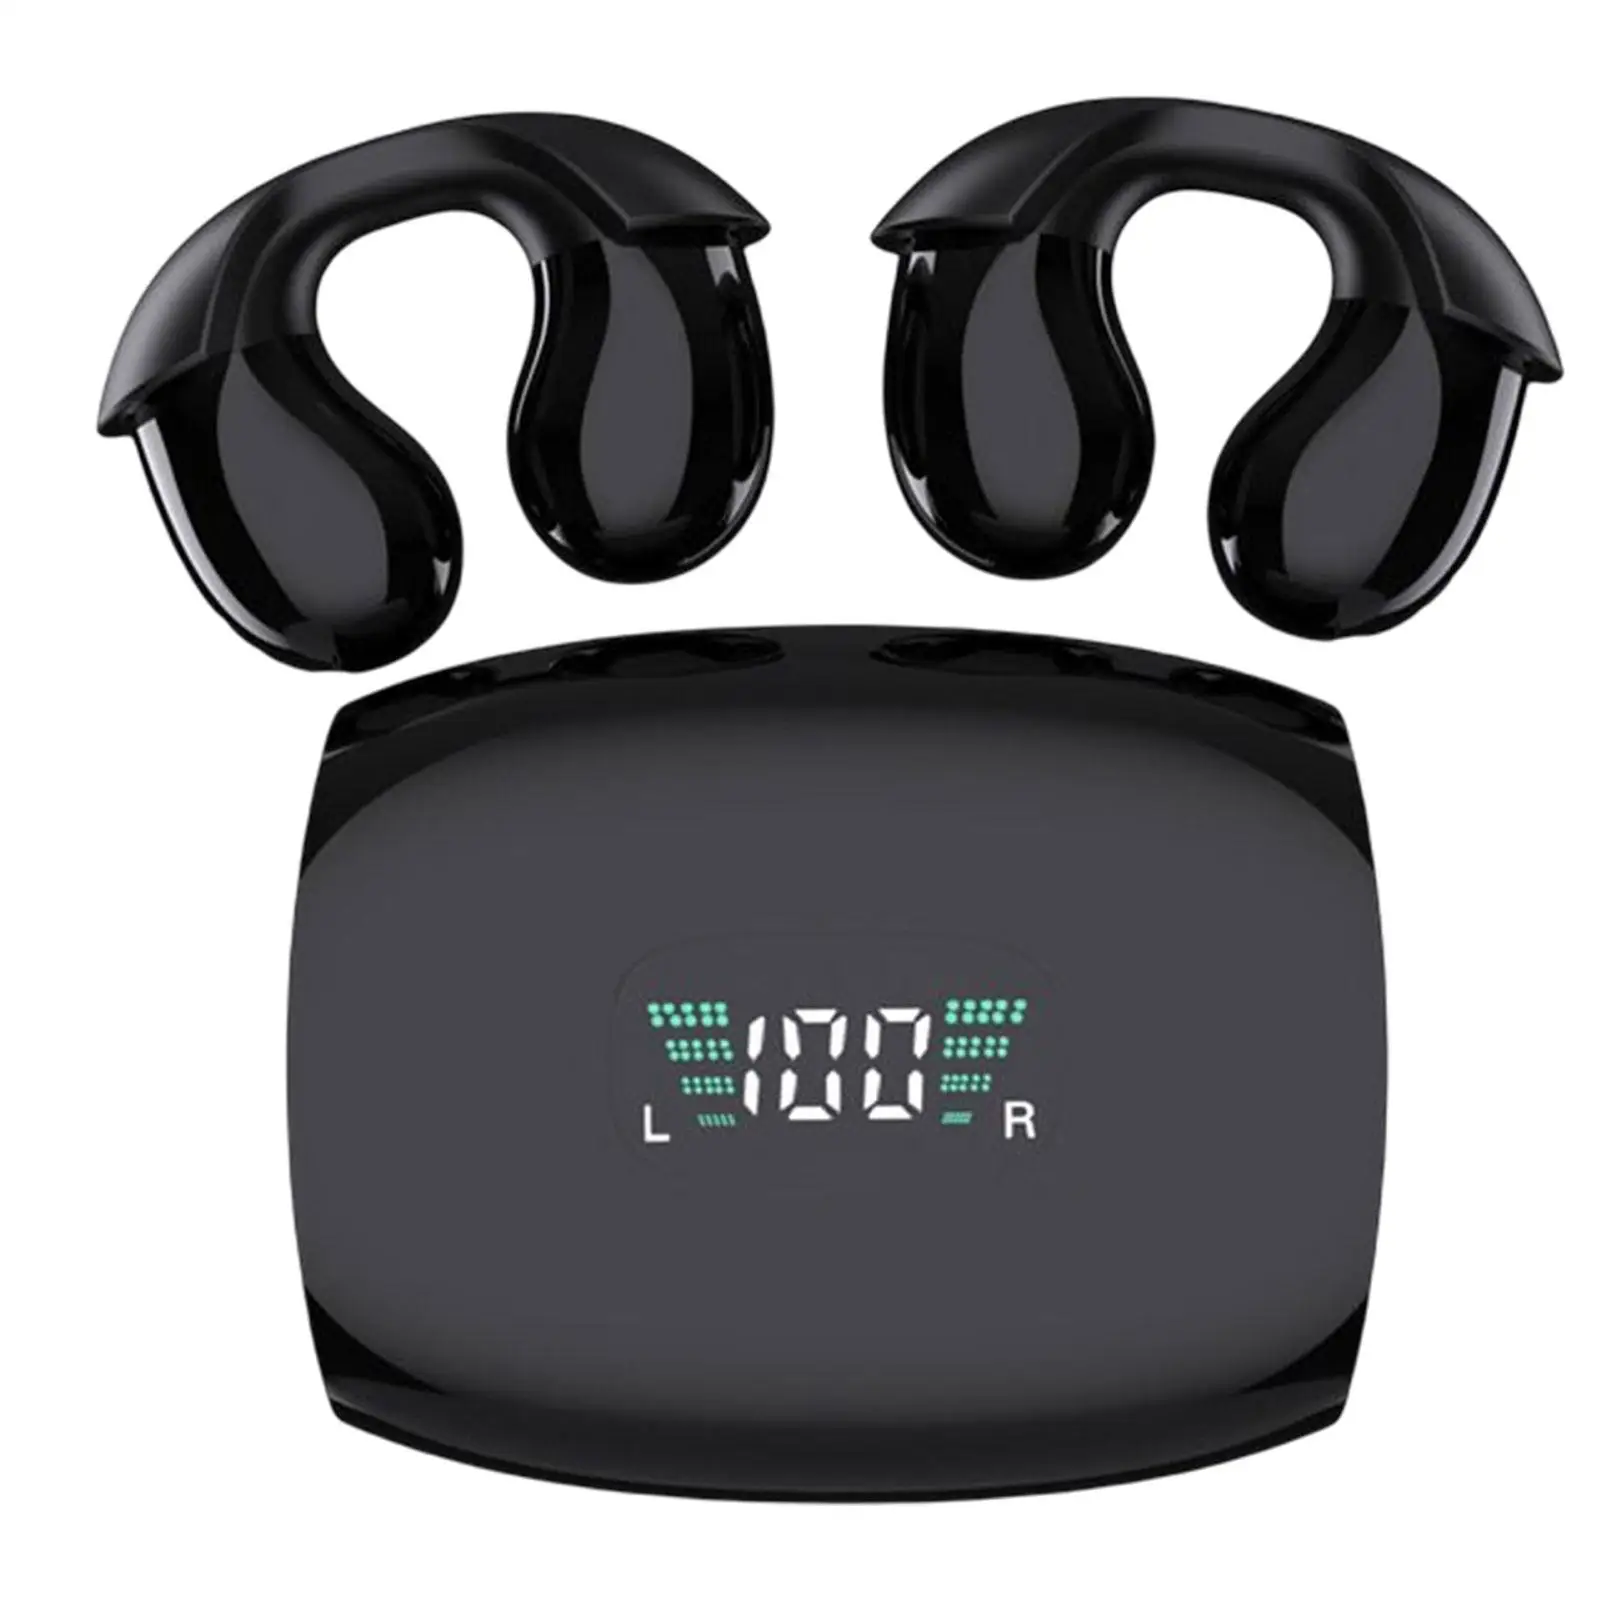 Ear Clip Headphones Touch Control Noise Reduction Waterproof HiFi Sound Small Clip on Earphones for Gym Running All Smart Phones